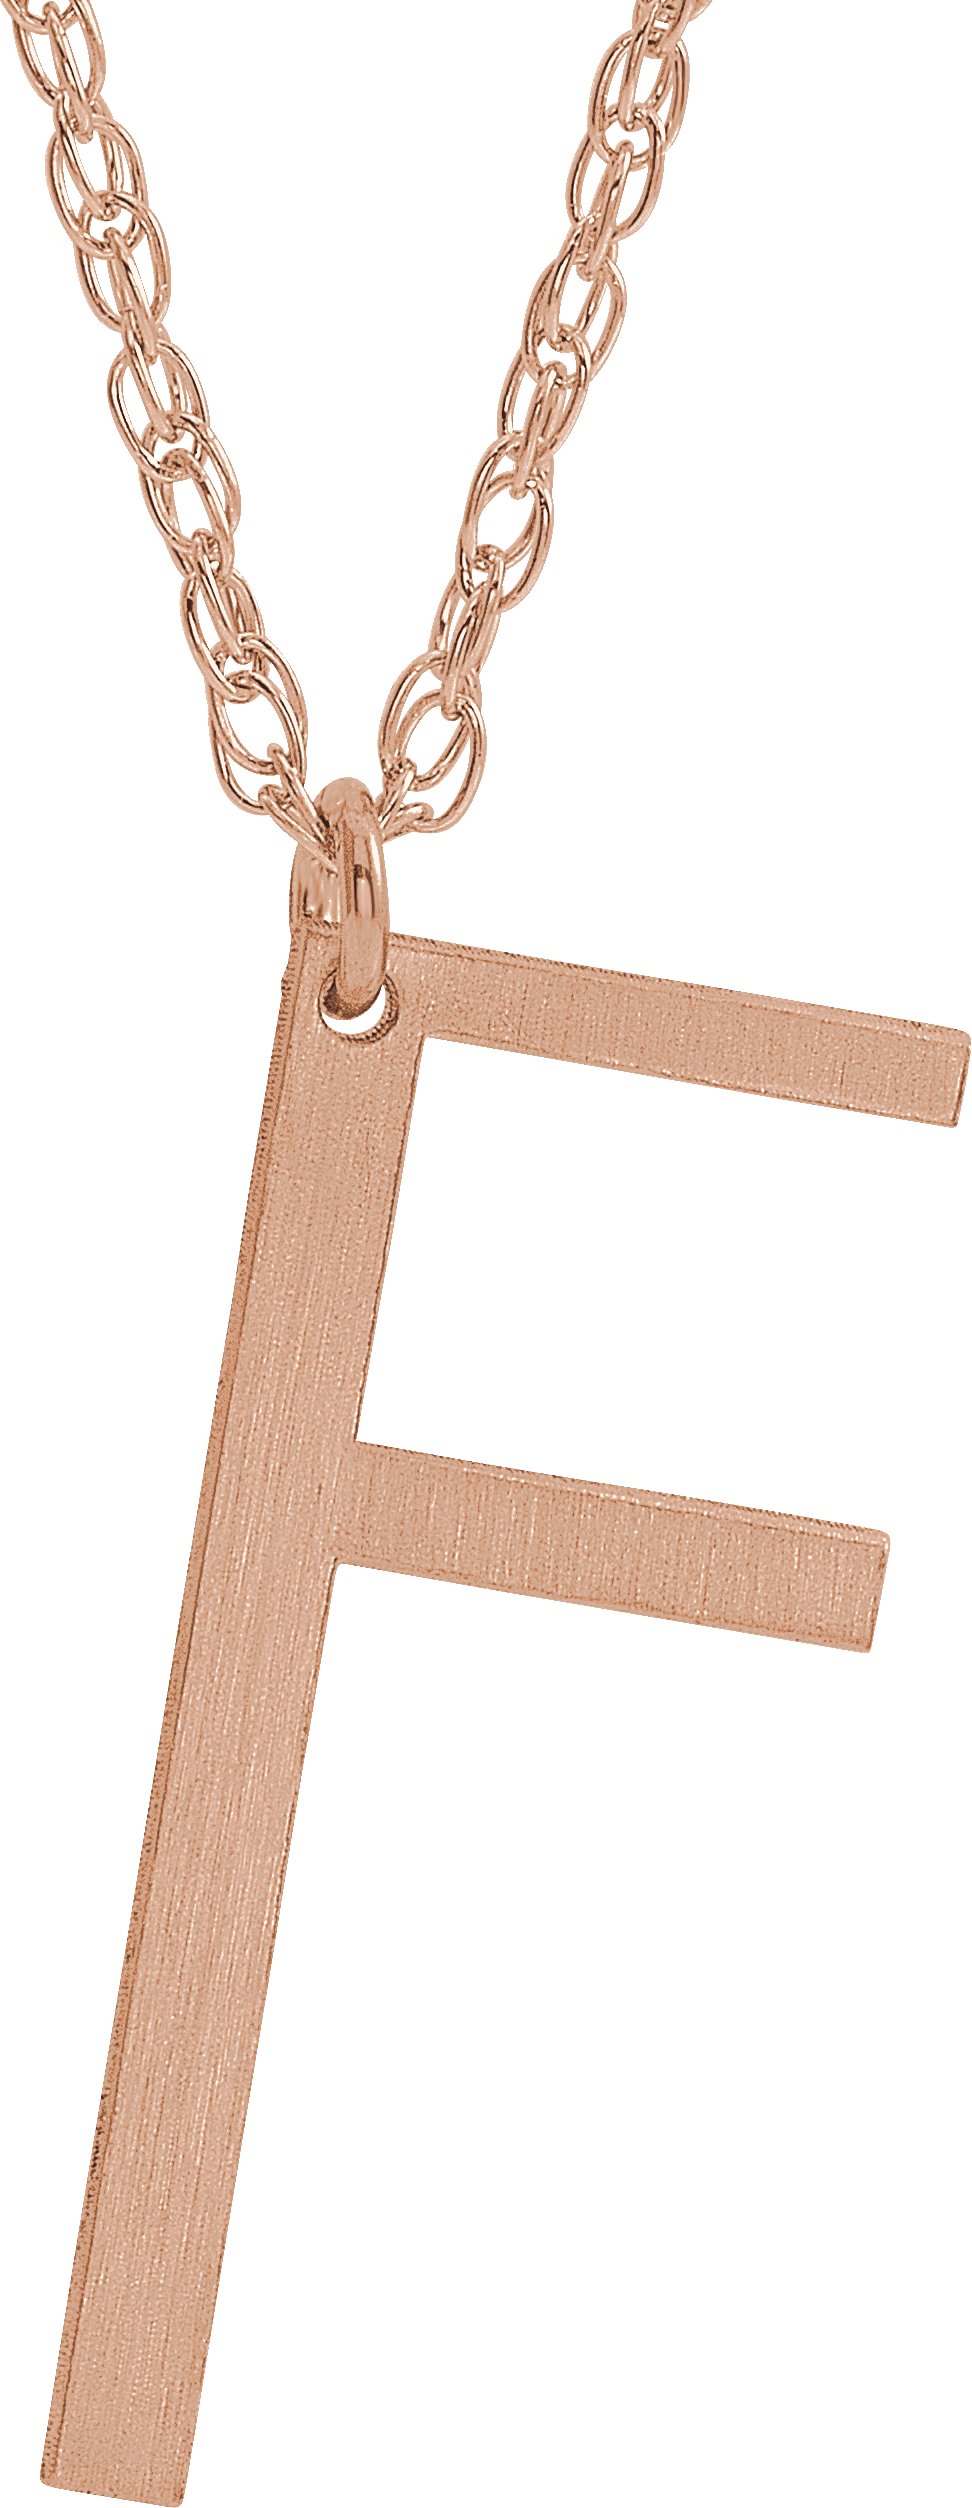 14K Rose Gold-Plated Sterling Silver Block Initial F 16-18" Necklace with Brush Finish